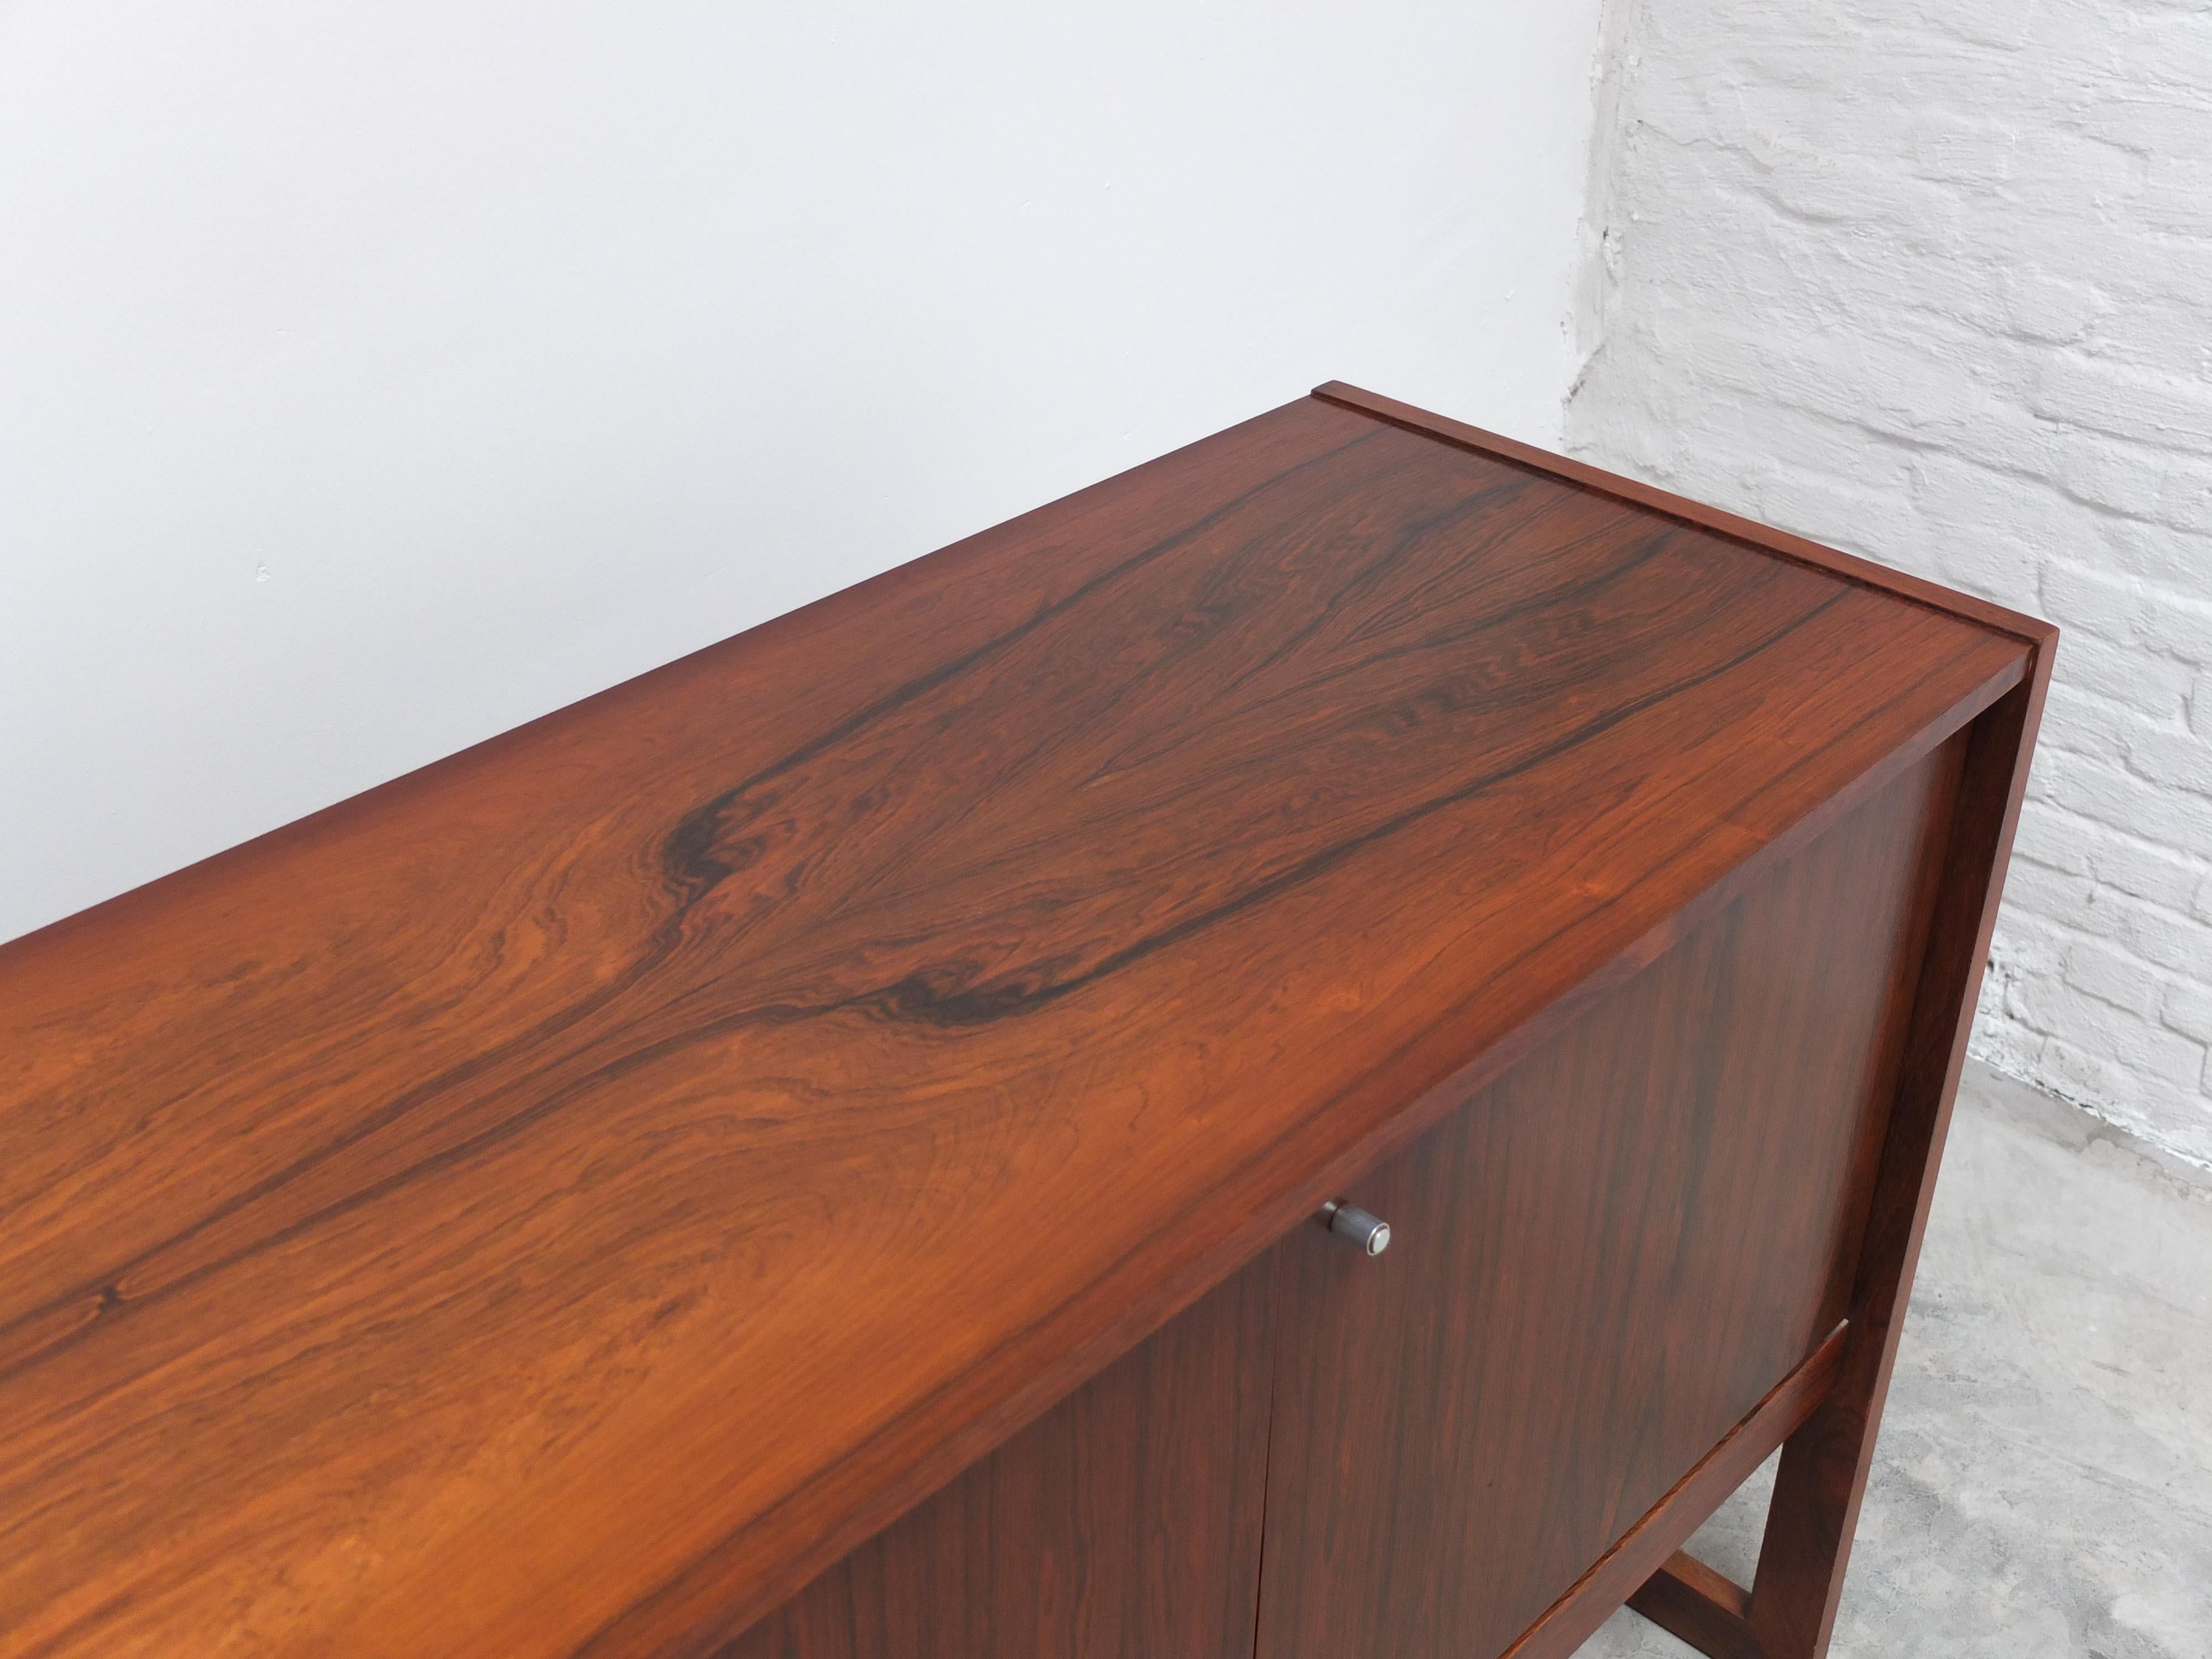 Large Exclusive 'Tecton' Sideboard by V-Form, 1960s For Sale 3